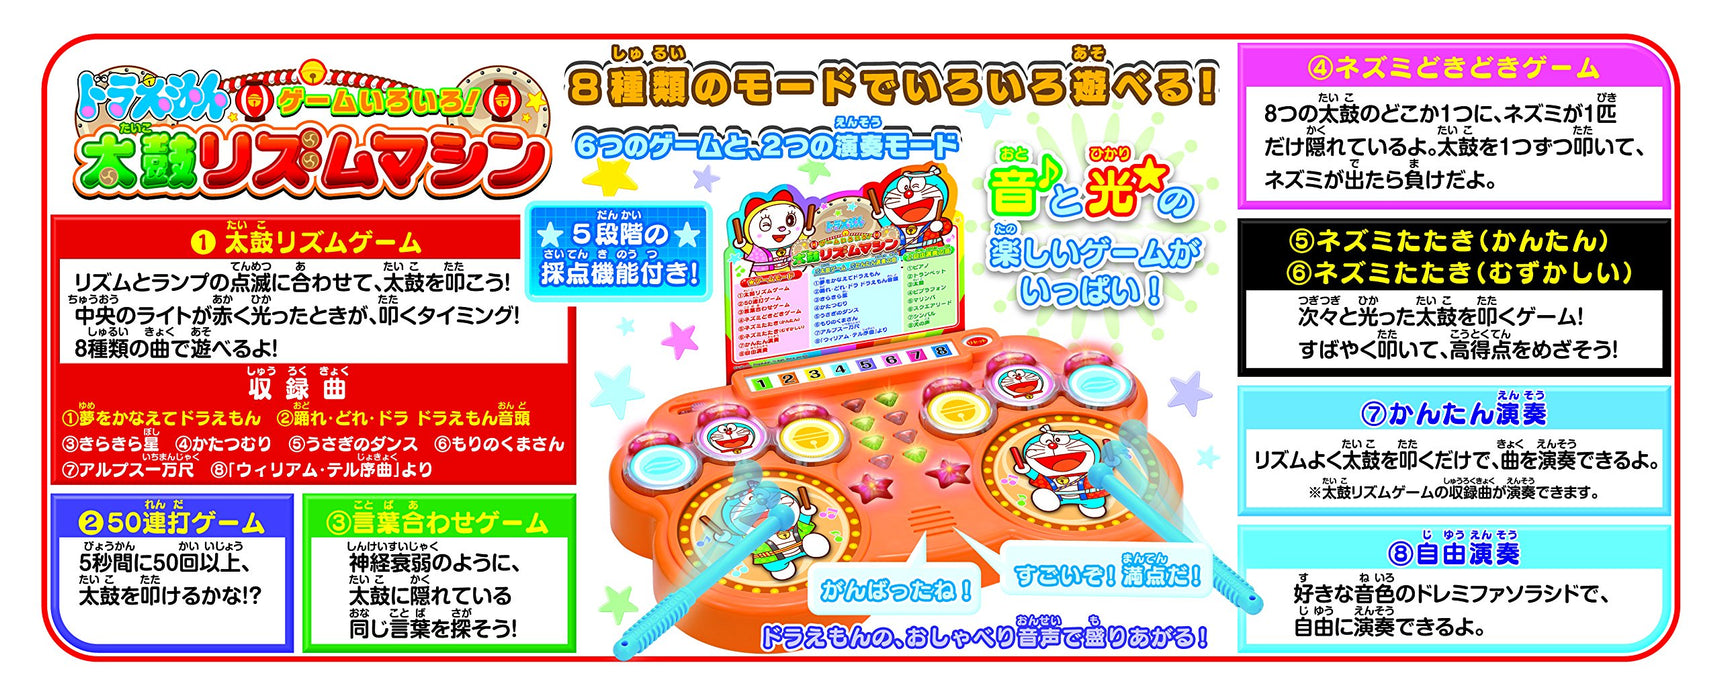 Epoch Doraemon Taiko Rhythm Game for Kids Certified St Mark Toy for Ages 4 and Up